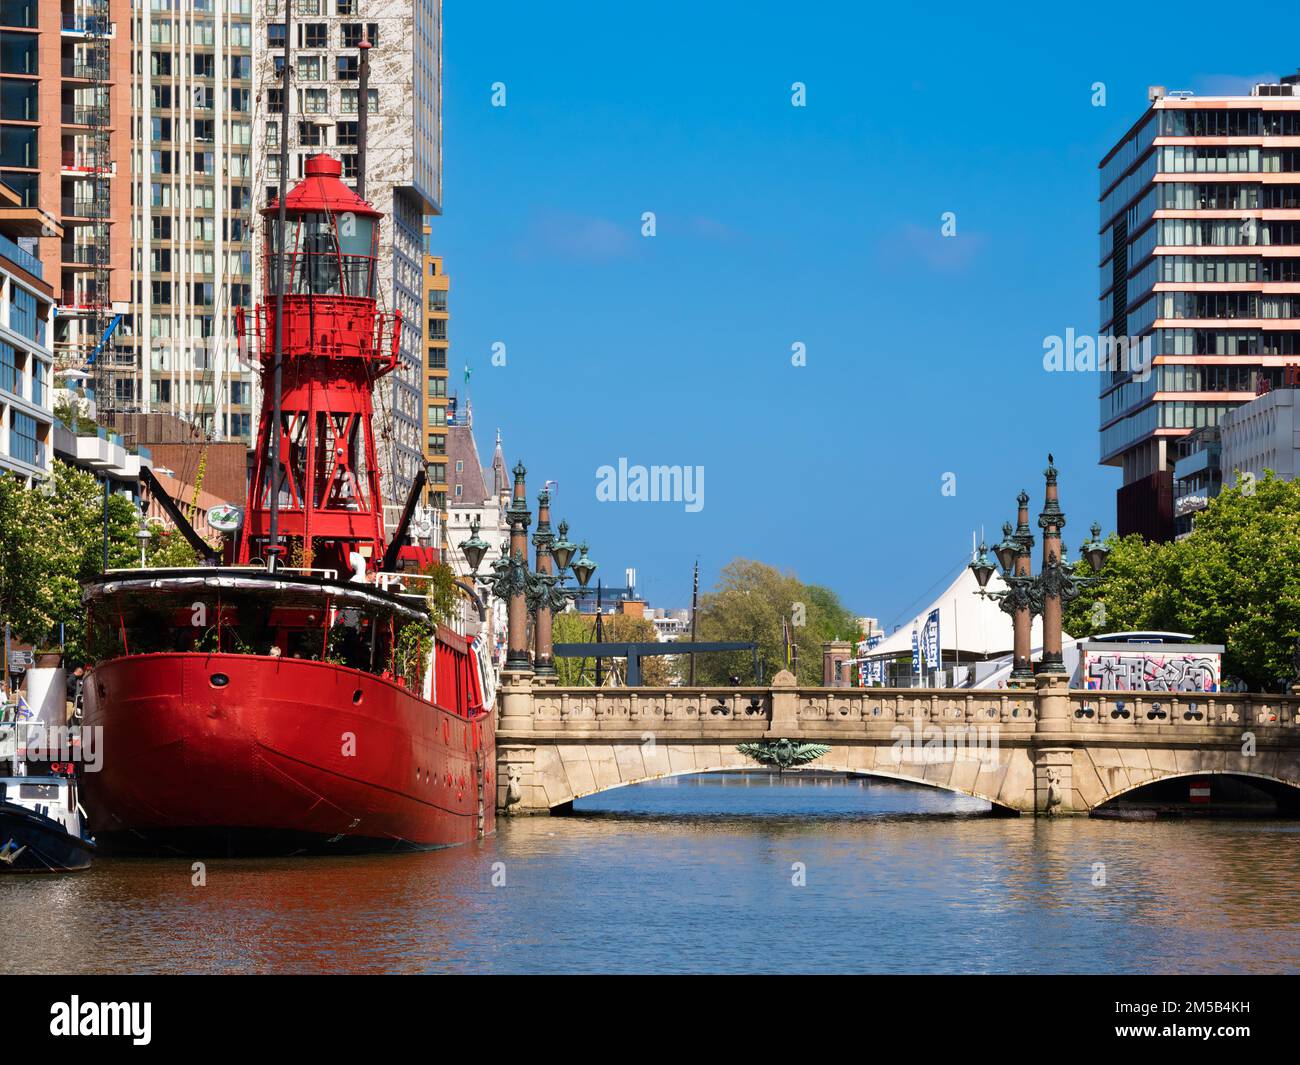 Rotterdam, Netherlands - April 28, 2022: Red ship Vesel II in Rotterdam, converted into a restaurant and modern residential buildings Stock Photo